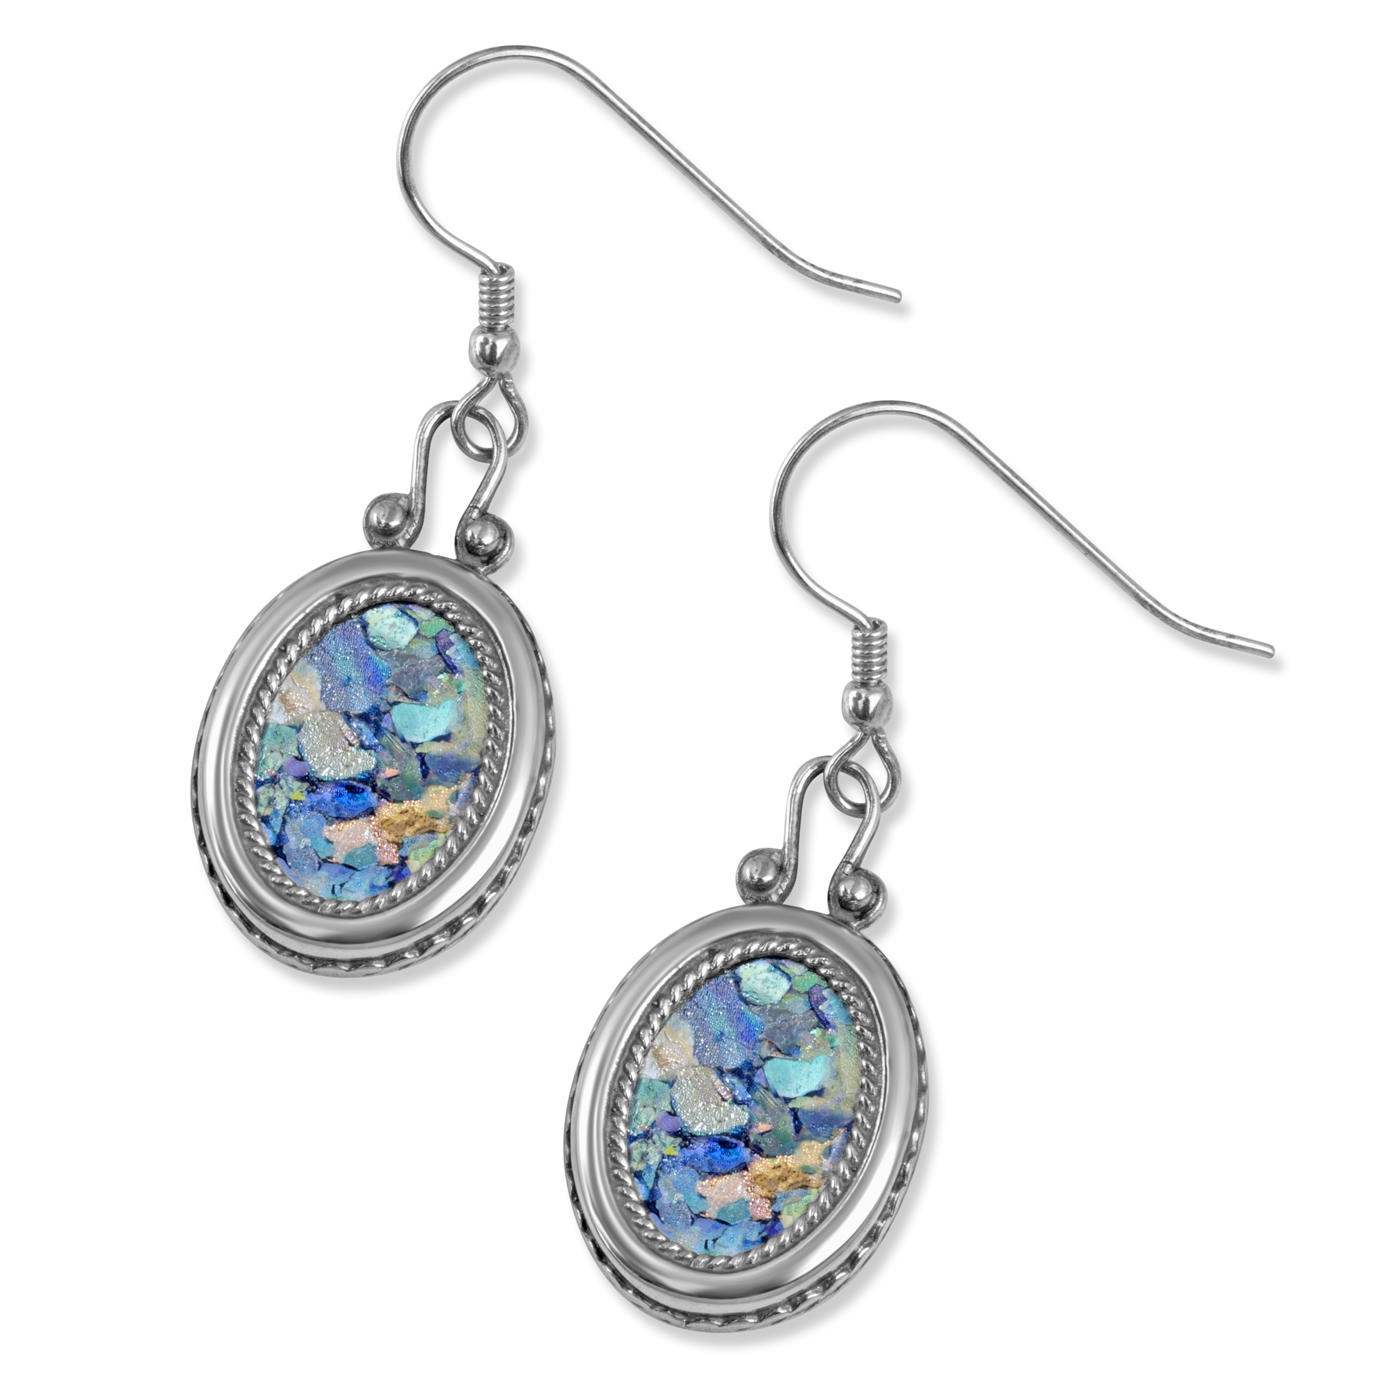 925 Sterling Silver and Roman Glass Oval Earrings with Filigree Border - 1